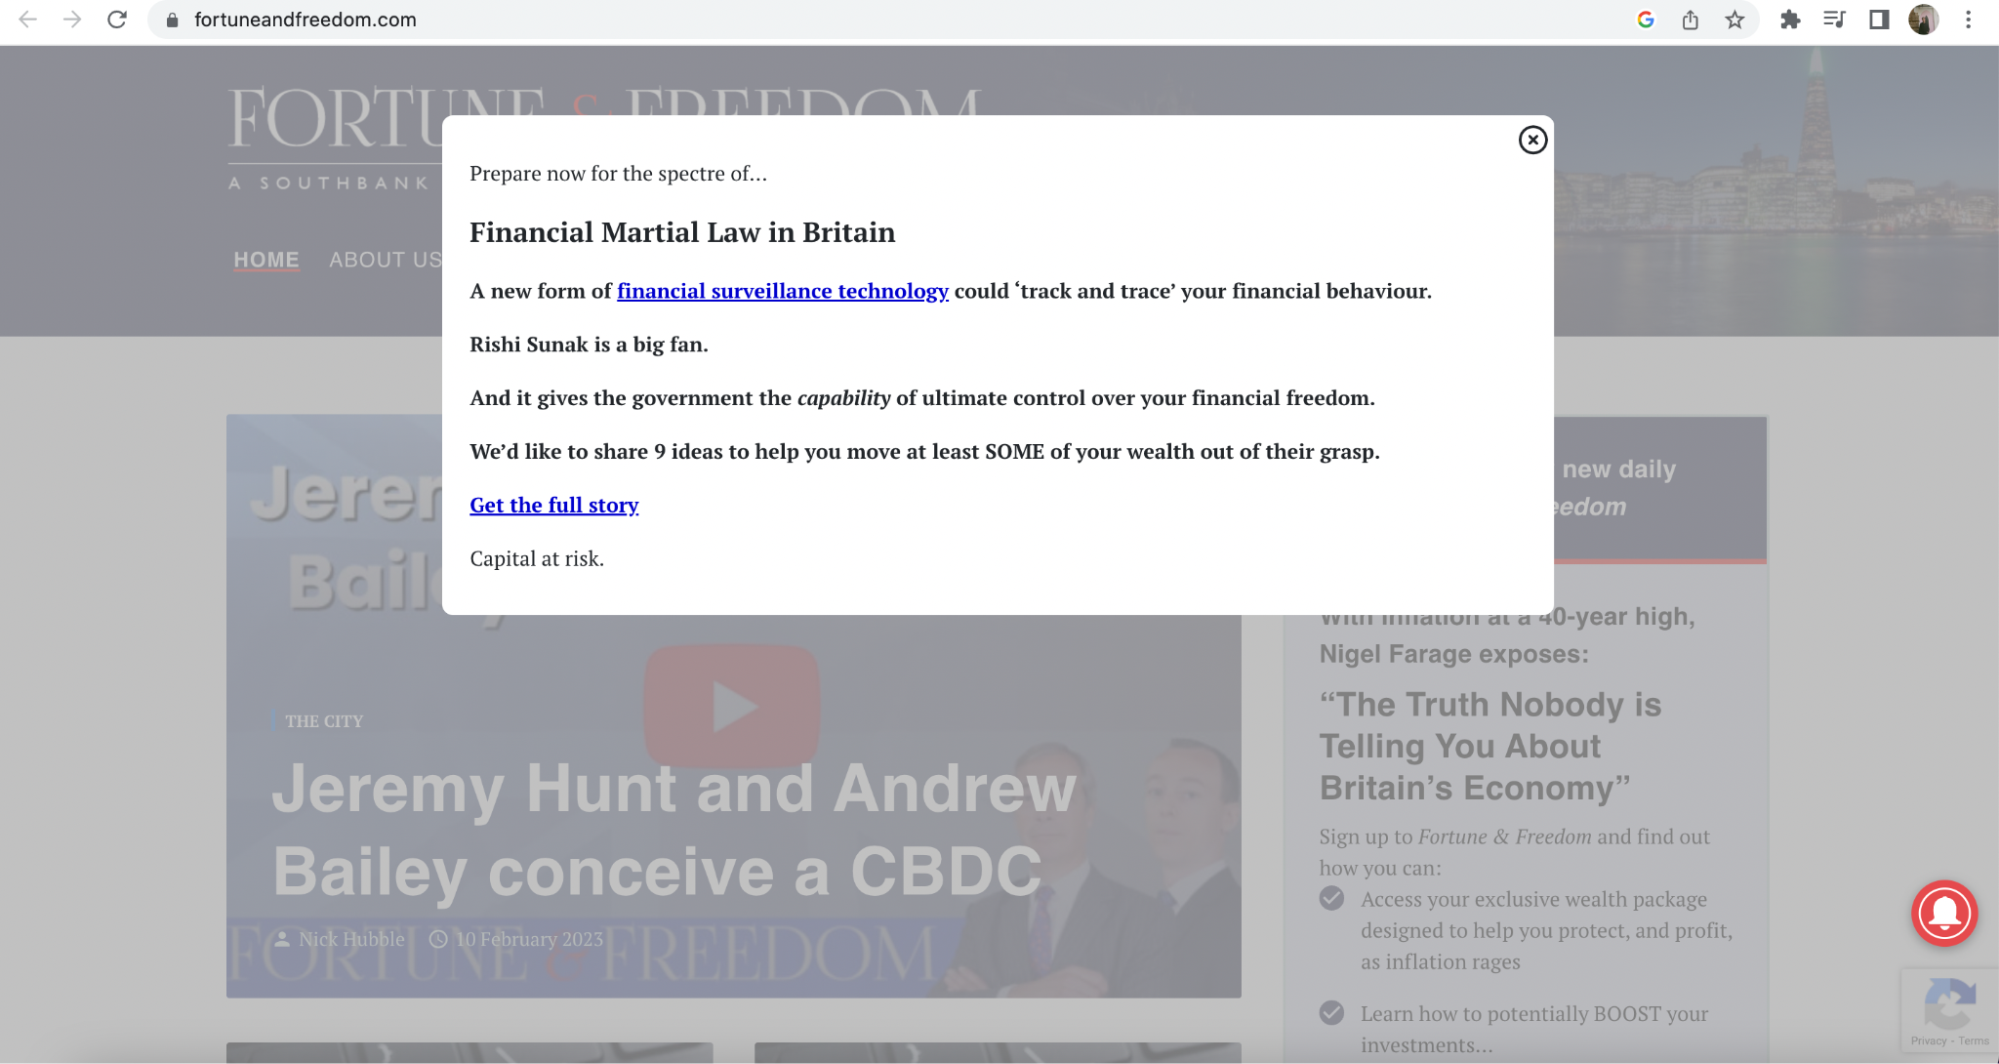 Screenshot of a popup on the Fortune and Freedom website, reading "financial martial law in britain: a new form of financial surveillance technology could track and trace your financial behavior. Rishi sunak is a big fan. And it gives the government the capability of ultimate control over your financial freedom. We'd like to share 9 ideas to help you move at least SOME of your wealth out of their grasp. Get the full story. (link) Capital at risk."